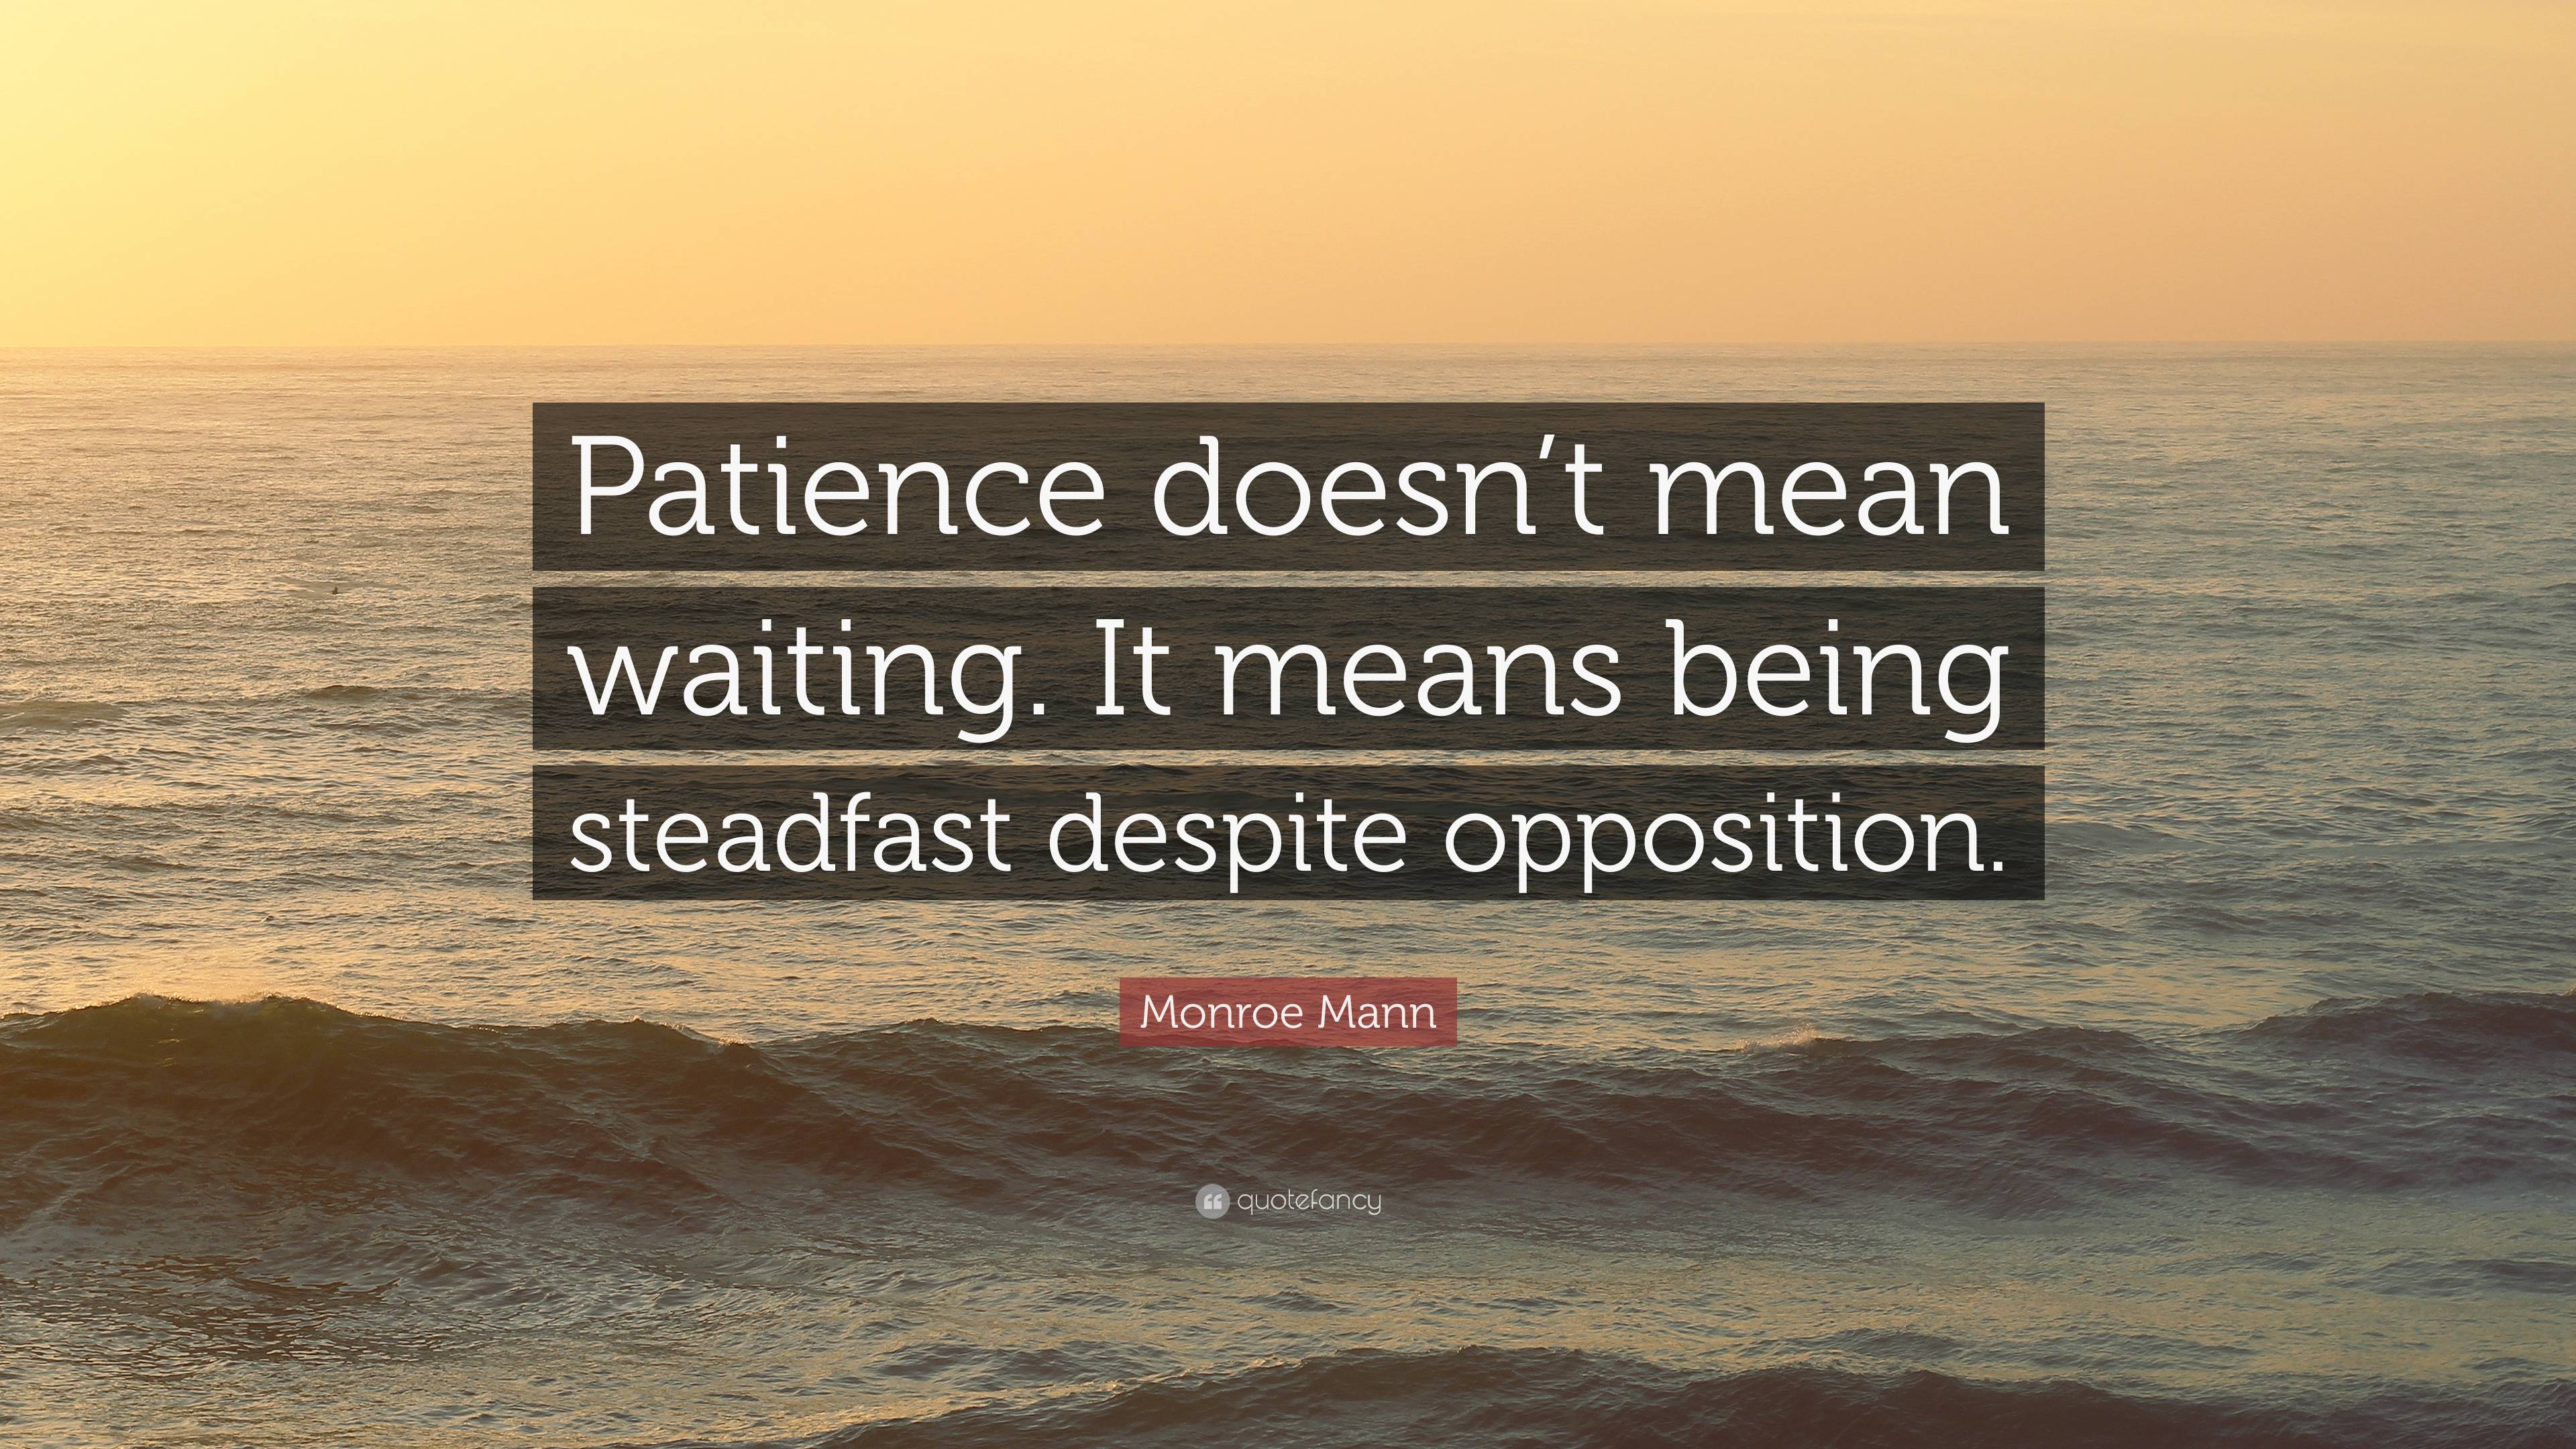 Monroe Mann Quote: “Patience doesn't mean waiting. It means being